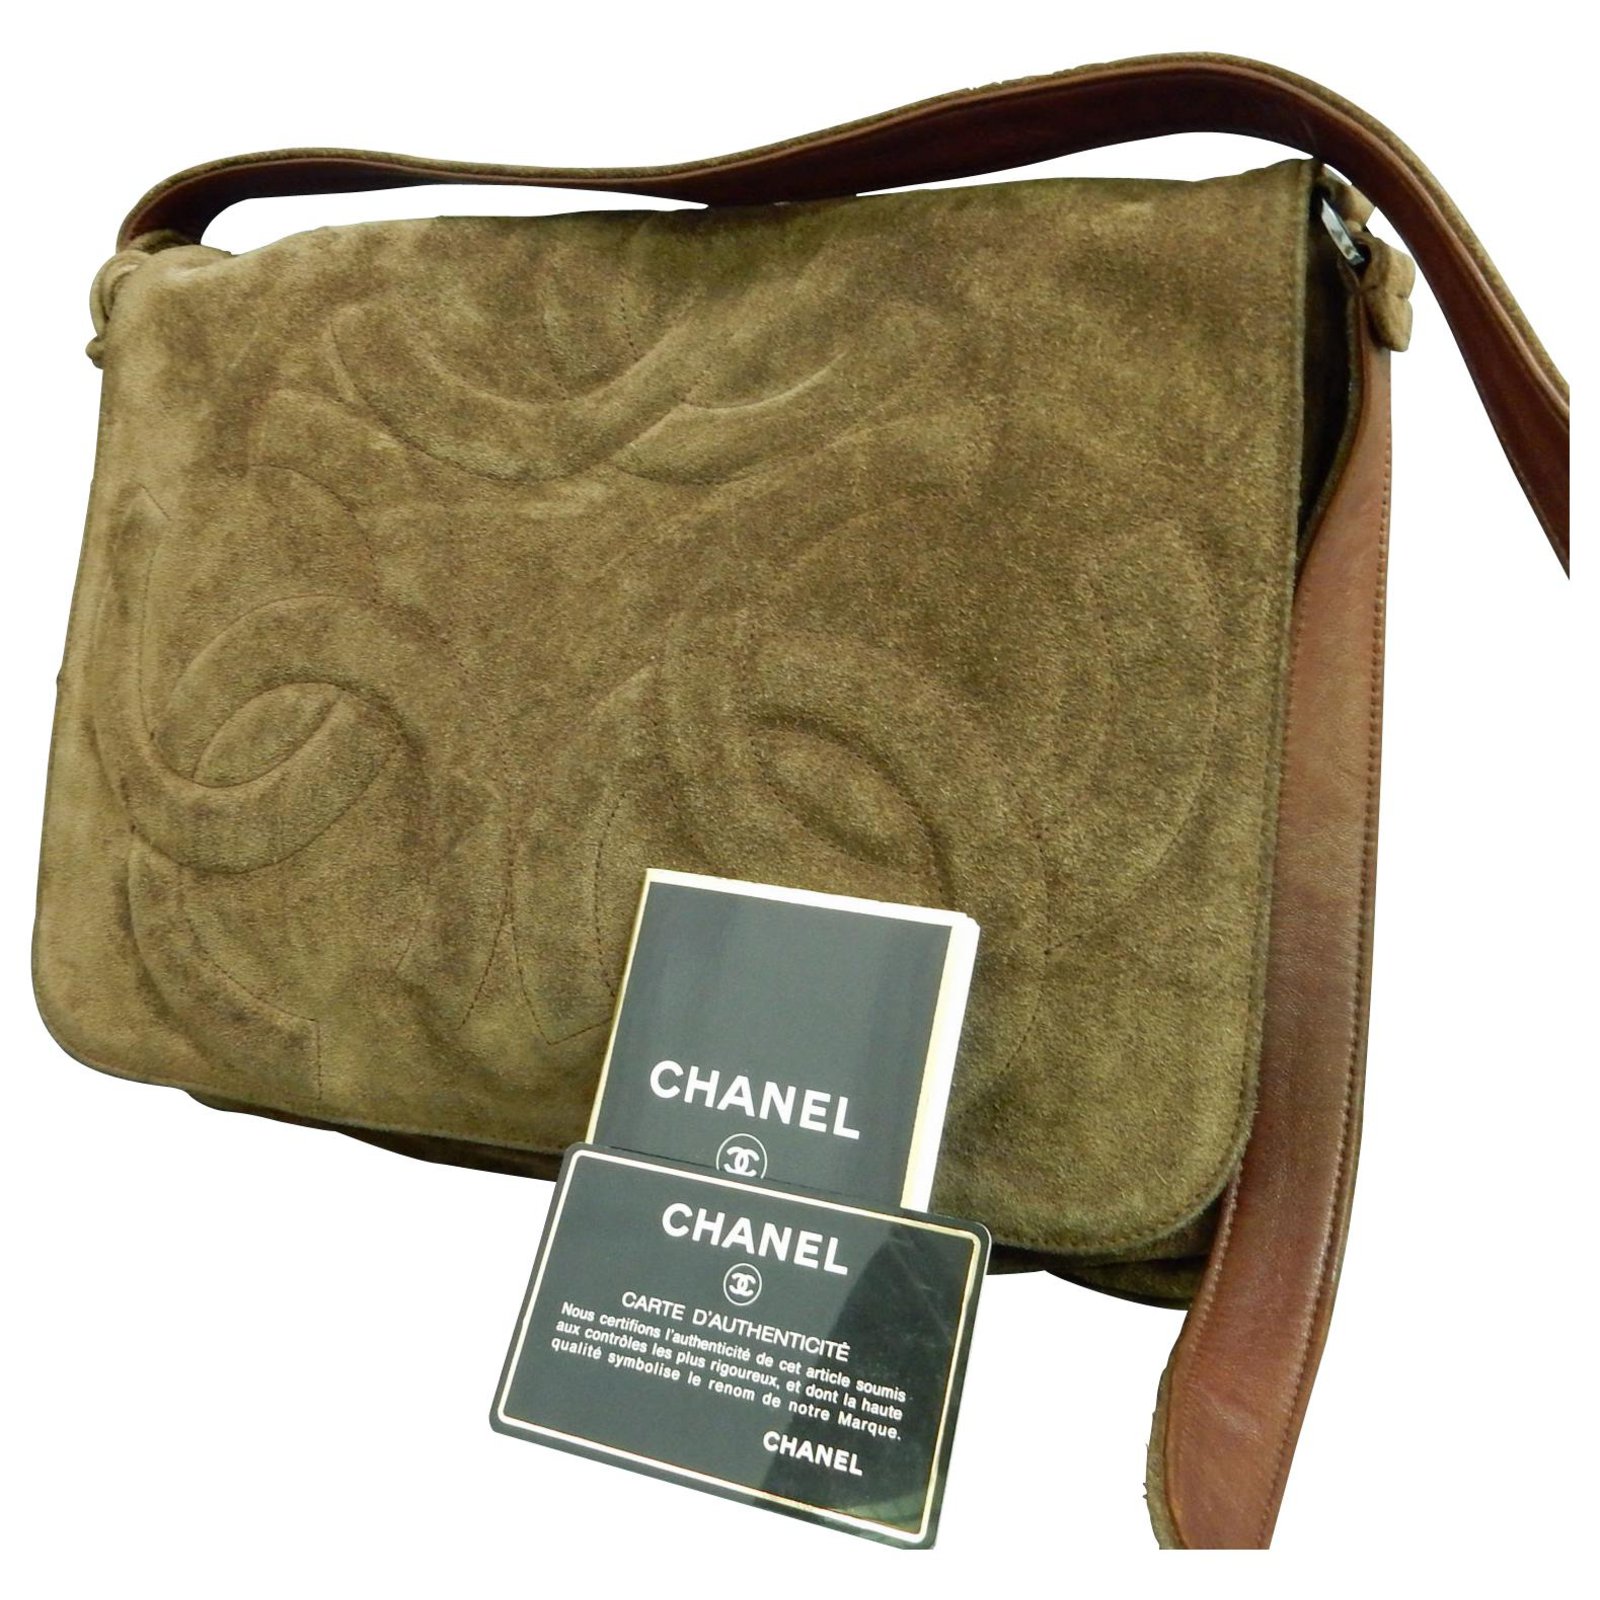 Snag the Latest CHANEL Suede Exterior Small Bags & Handbags for Women with  Fast and Free Shipping. Authenticity Guaranteed on Designer Handbags $500+  at .